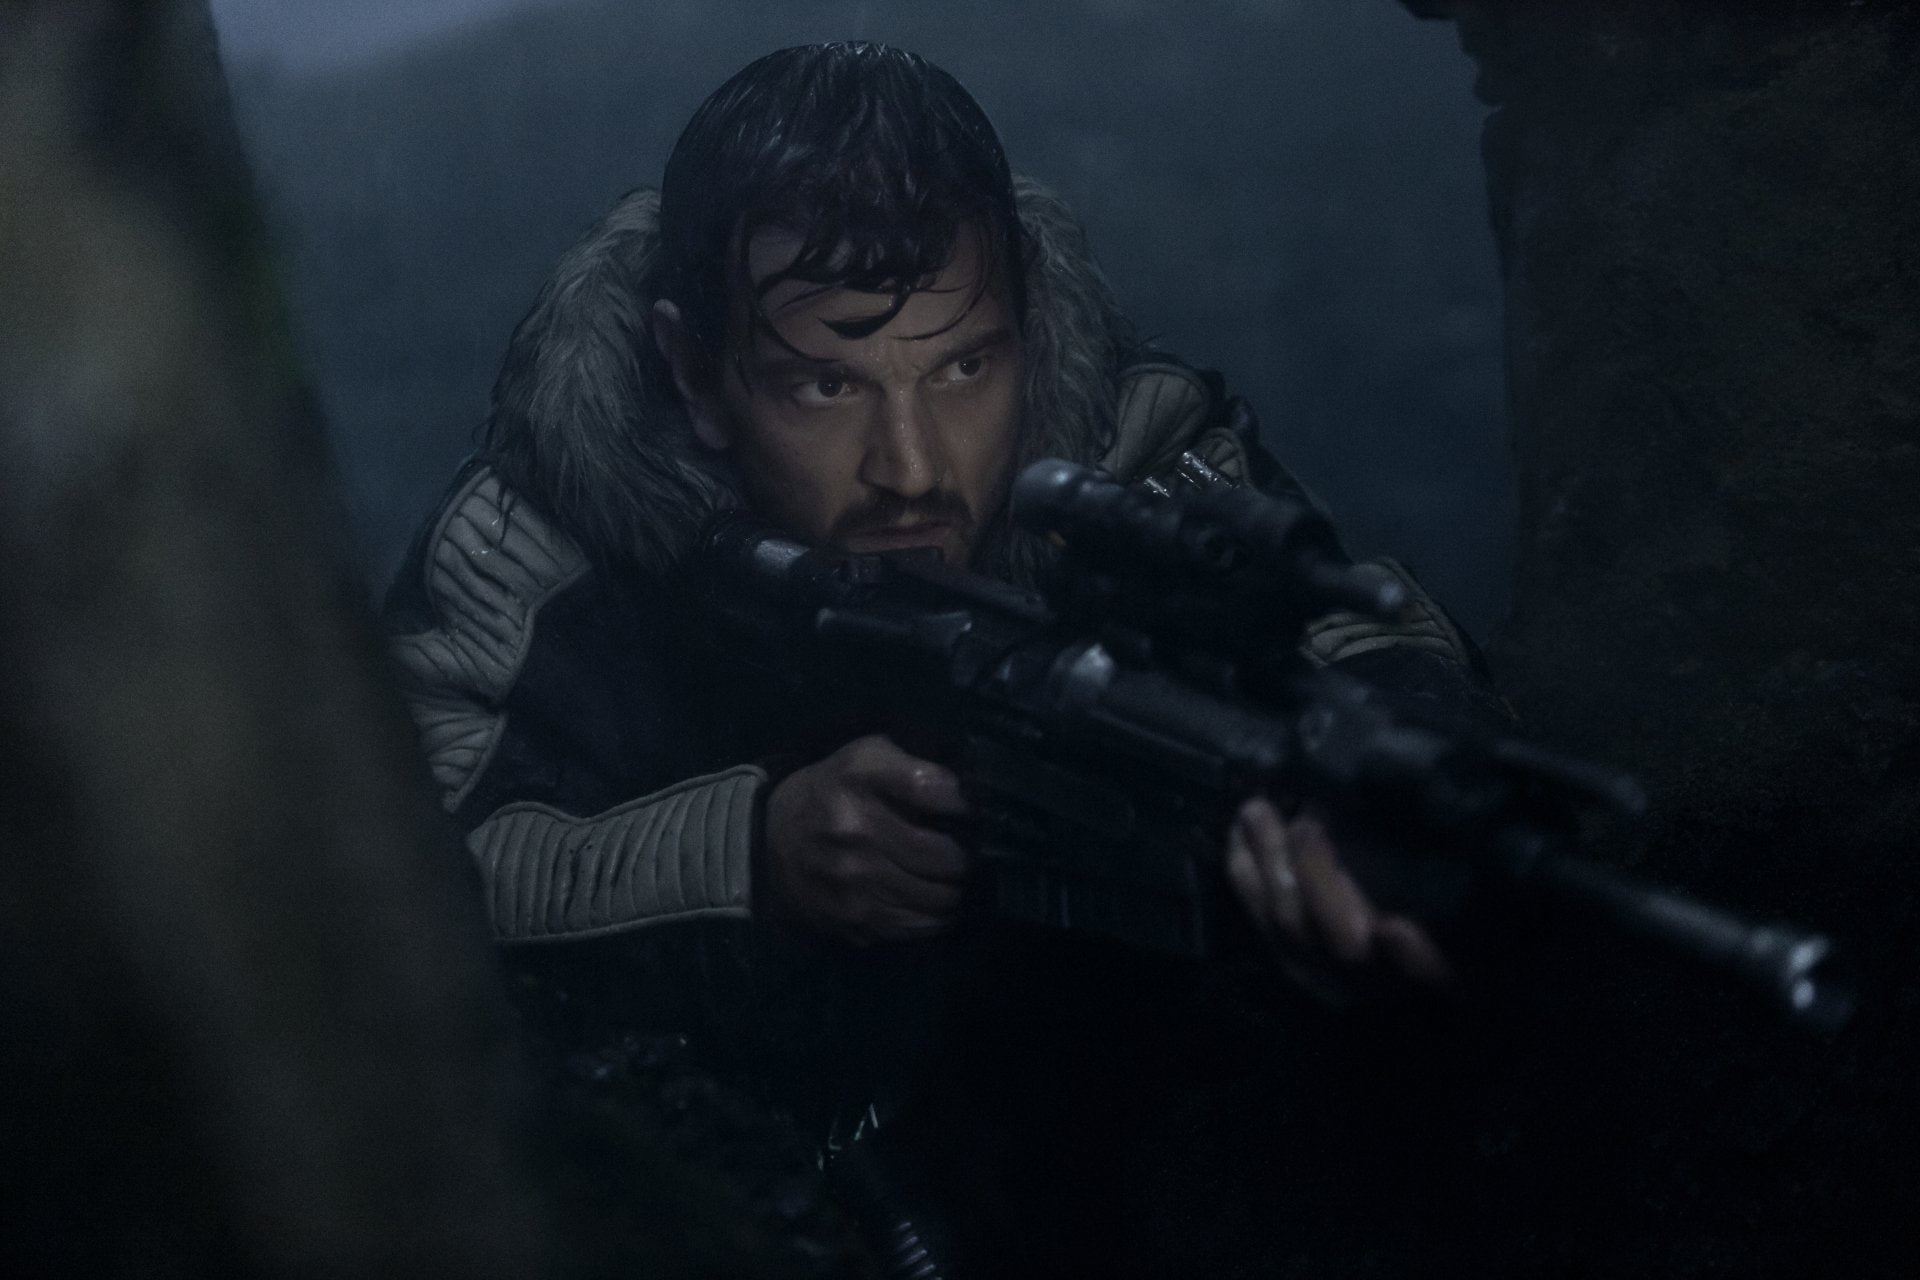 Star Wars, Rogue One: A Star Wars Story, Captain Cassian Andor